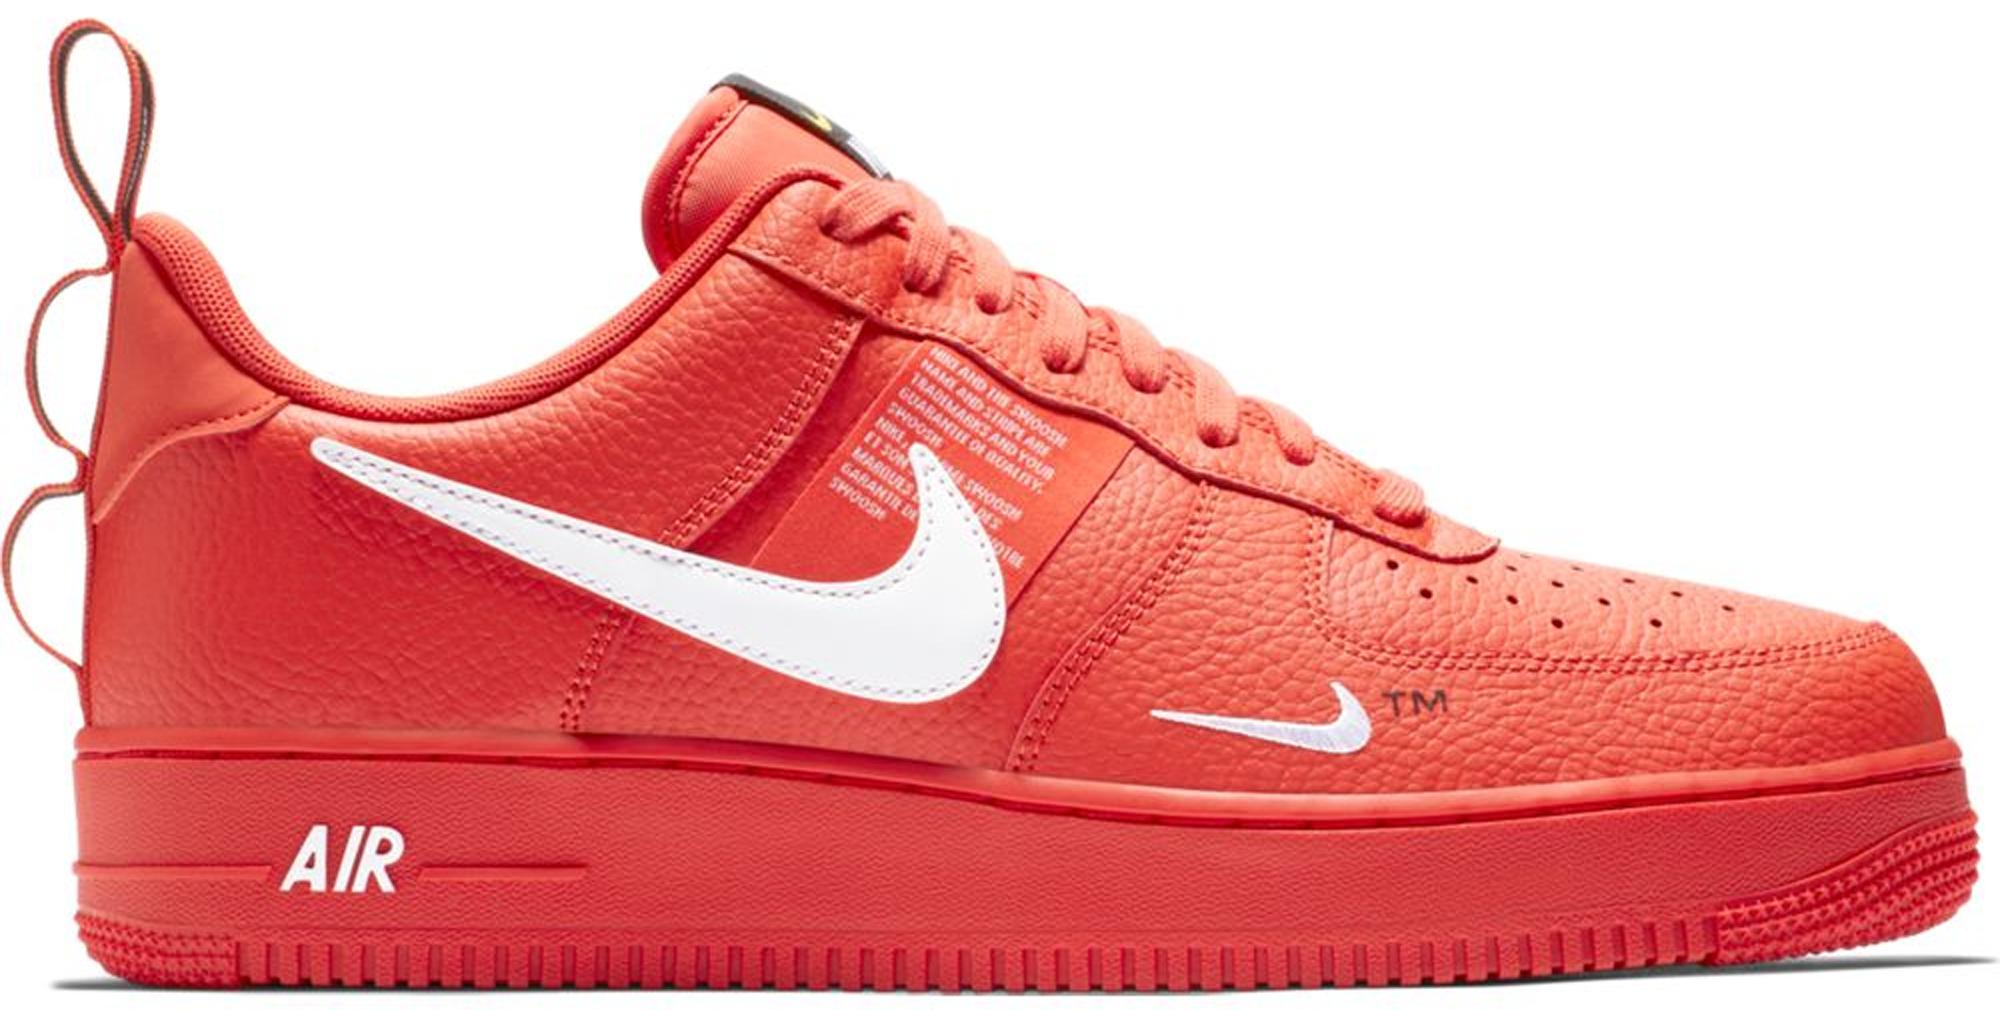 Nike Air Force 1' 07 Lv8 Utility Shoe in Orange for Men - Save 75% - Lyst